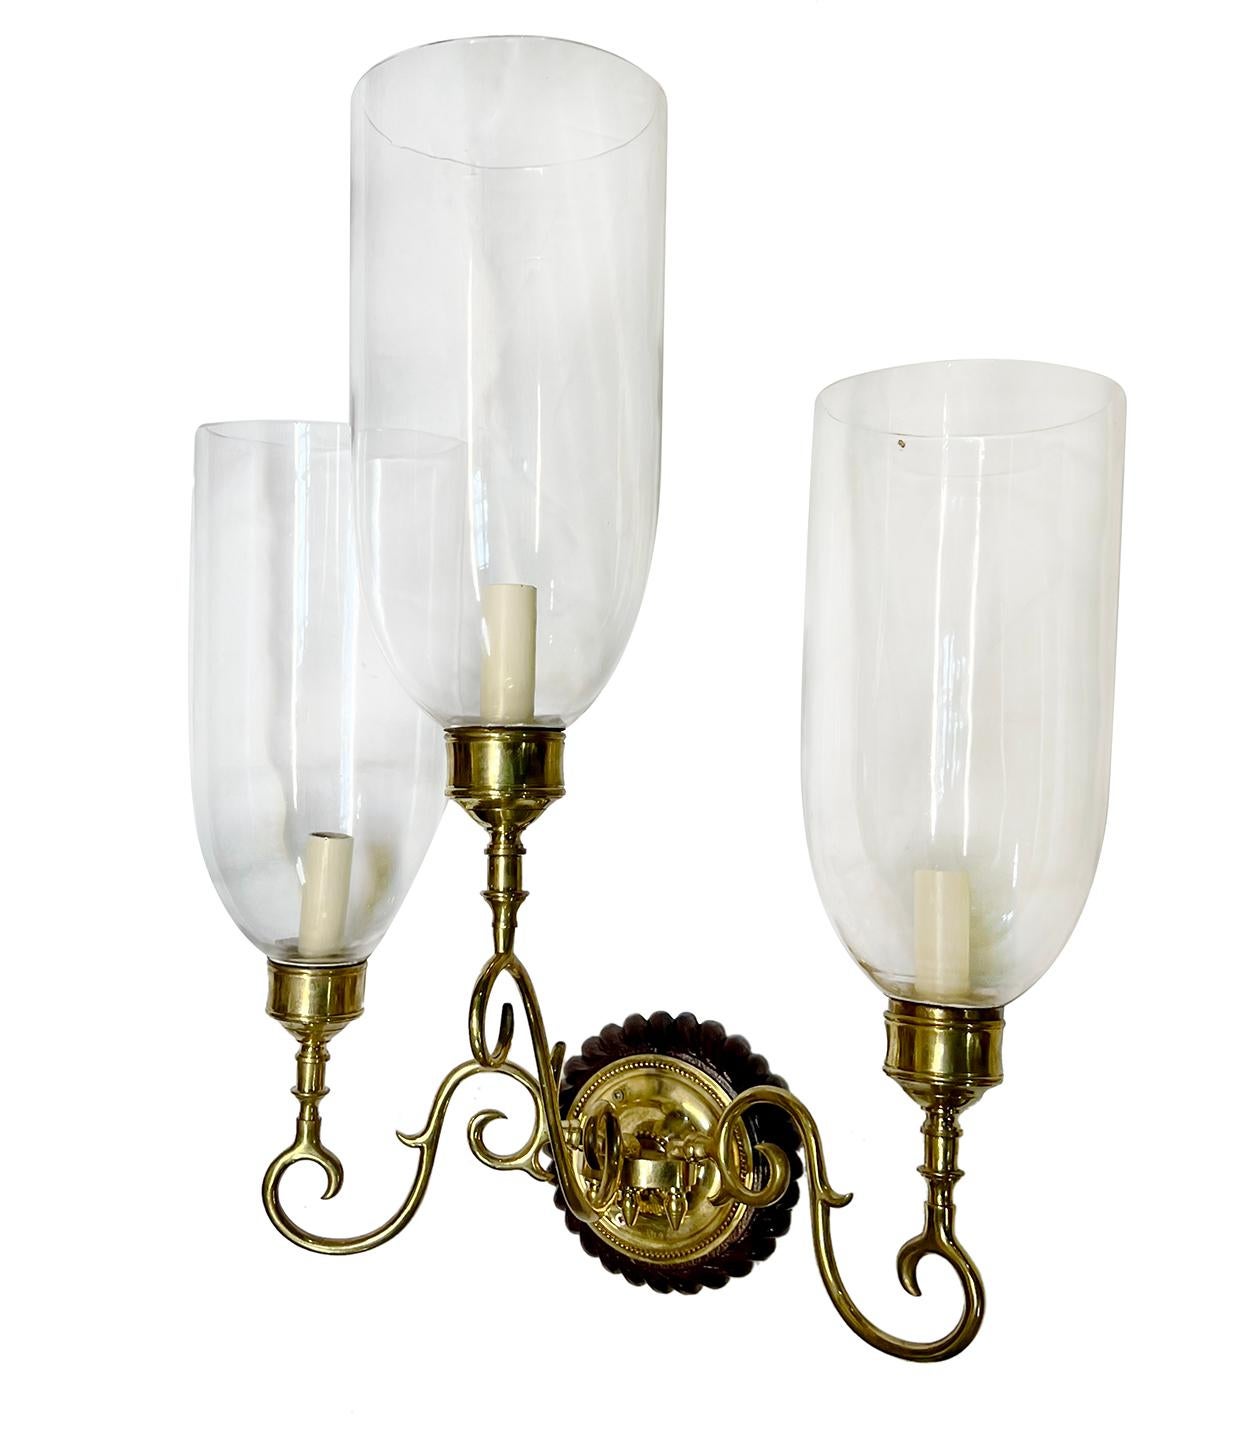 Set of four large circa 1950's three-arm Anglo-Indian sconces with wooden backplate and brass finish. Sold in pairs.

Measurements:
Height: 23